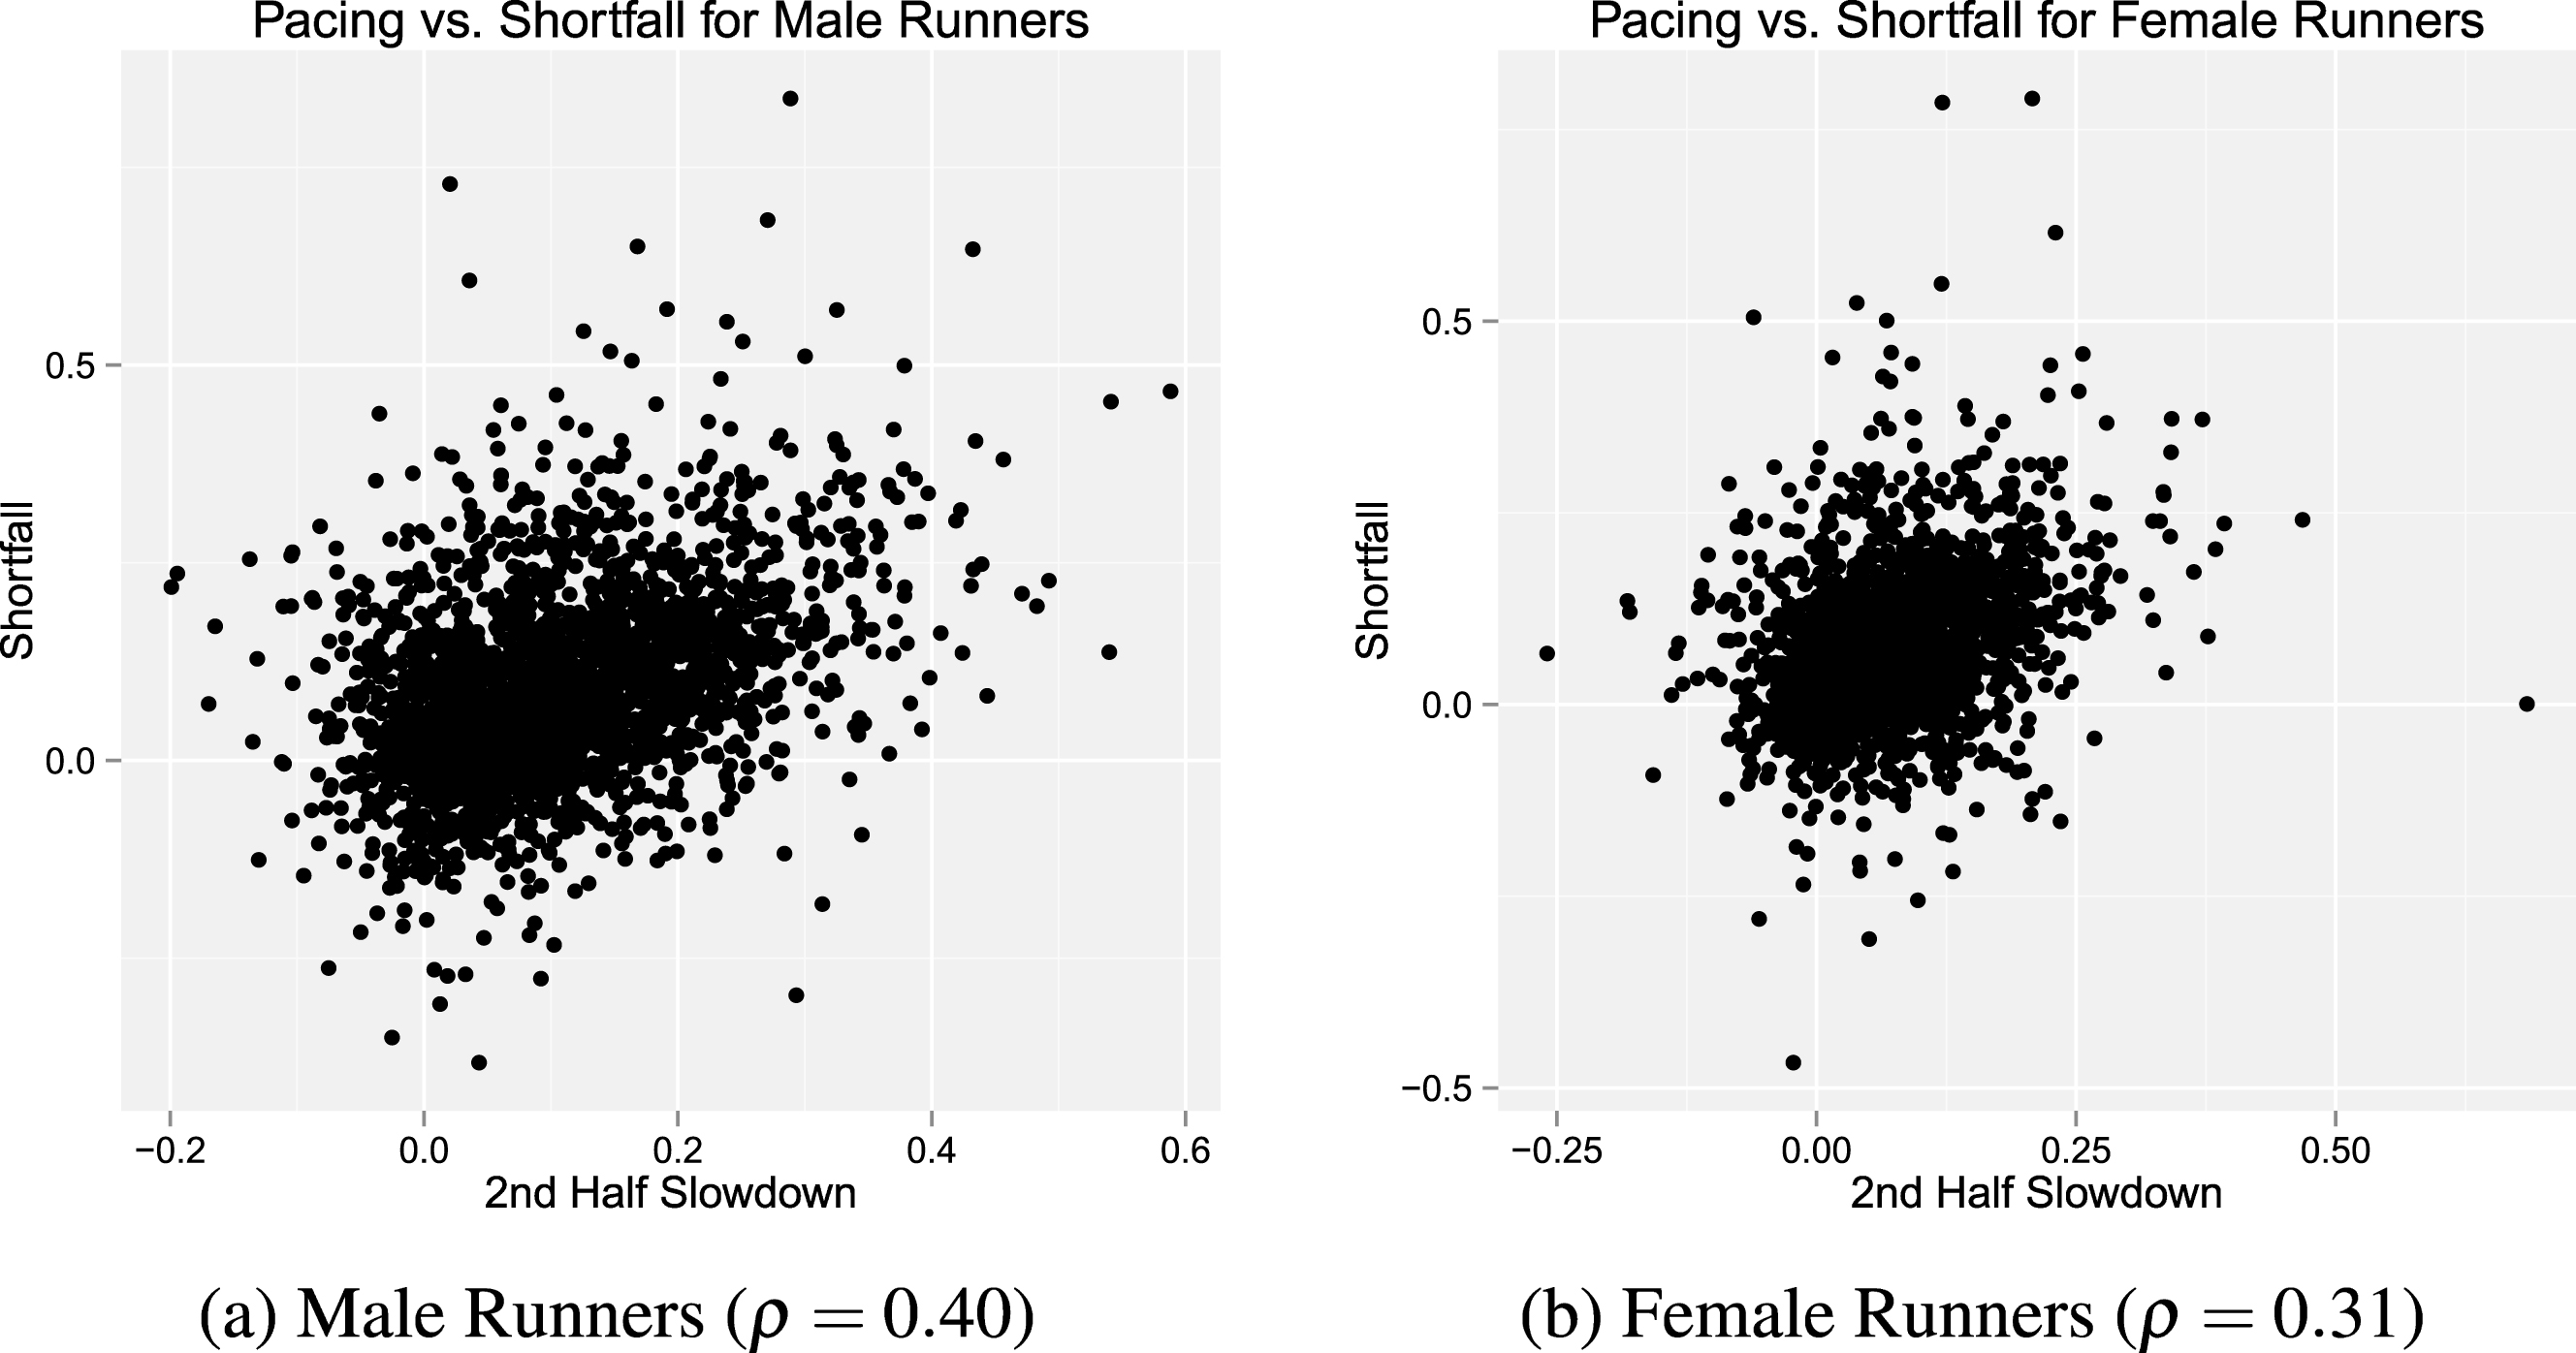 Scatterplot of the relationship between 2nd half slowdown and shortfall
for runners by gender. We find a statistically significant correlation (p <0.01)
between pacing and shortfall across all genders.